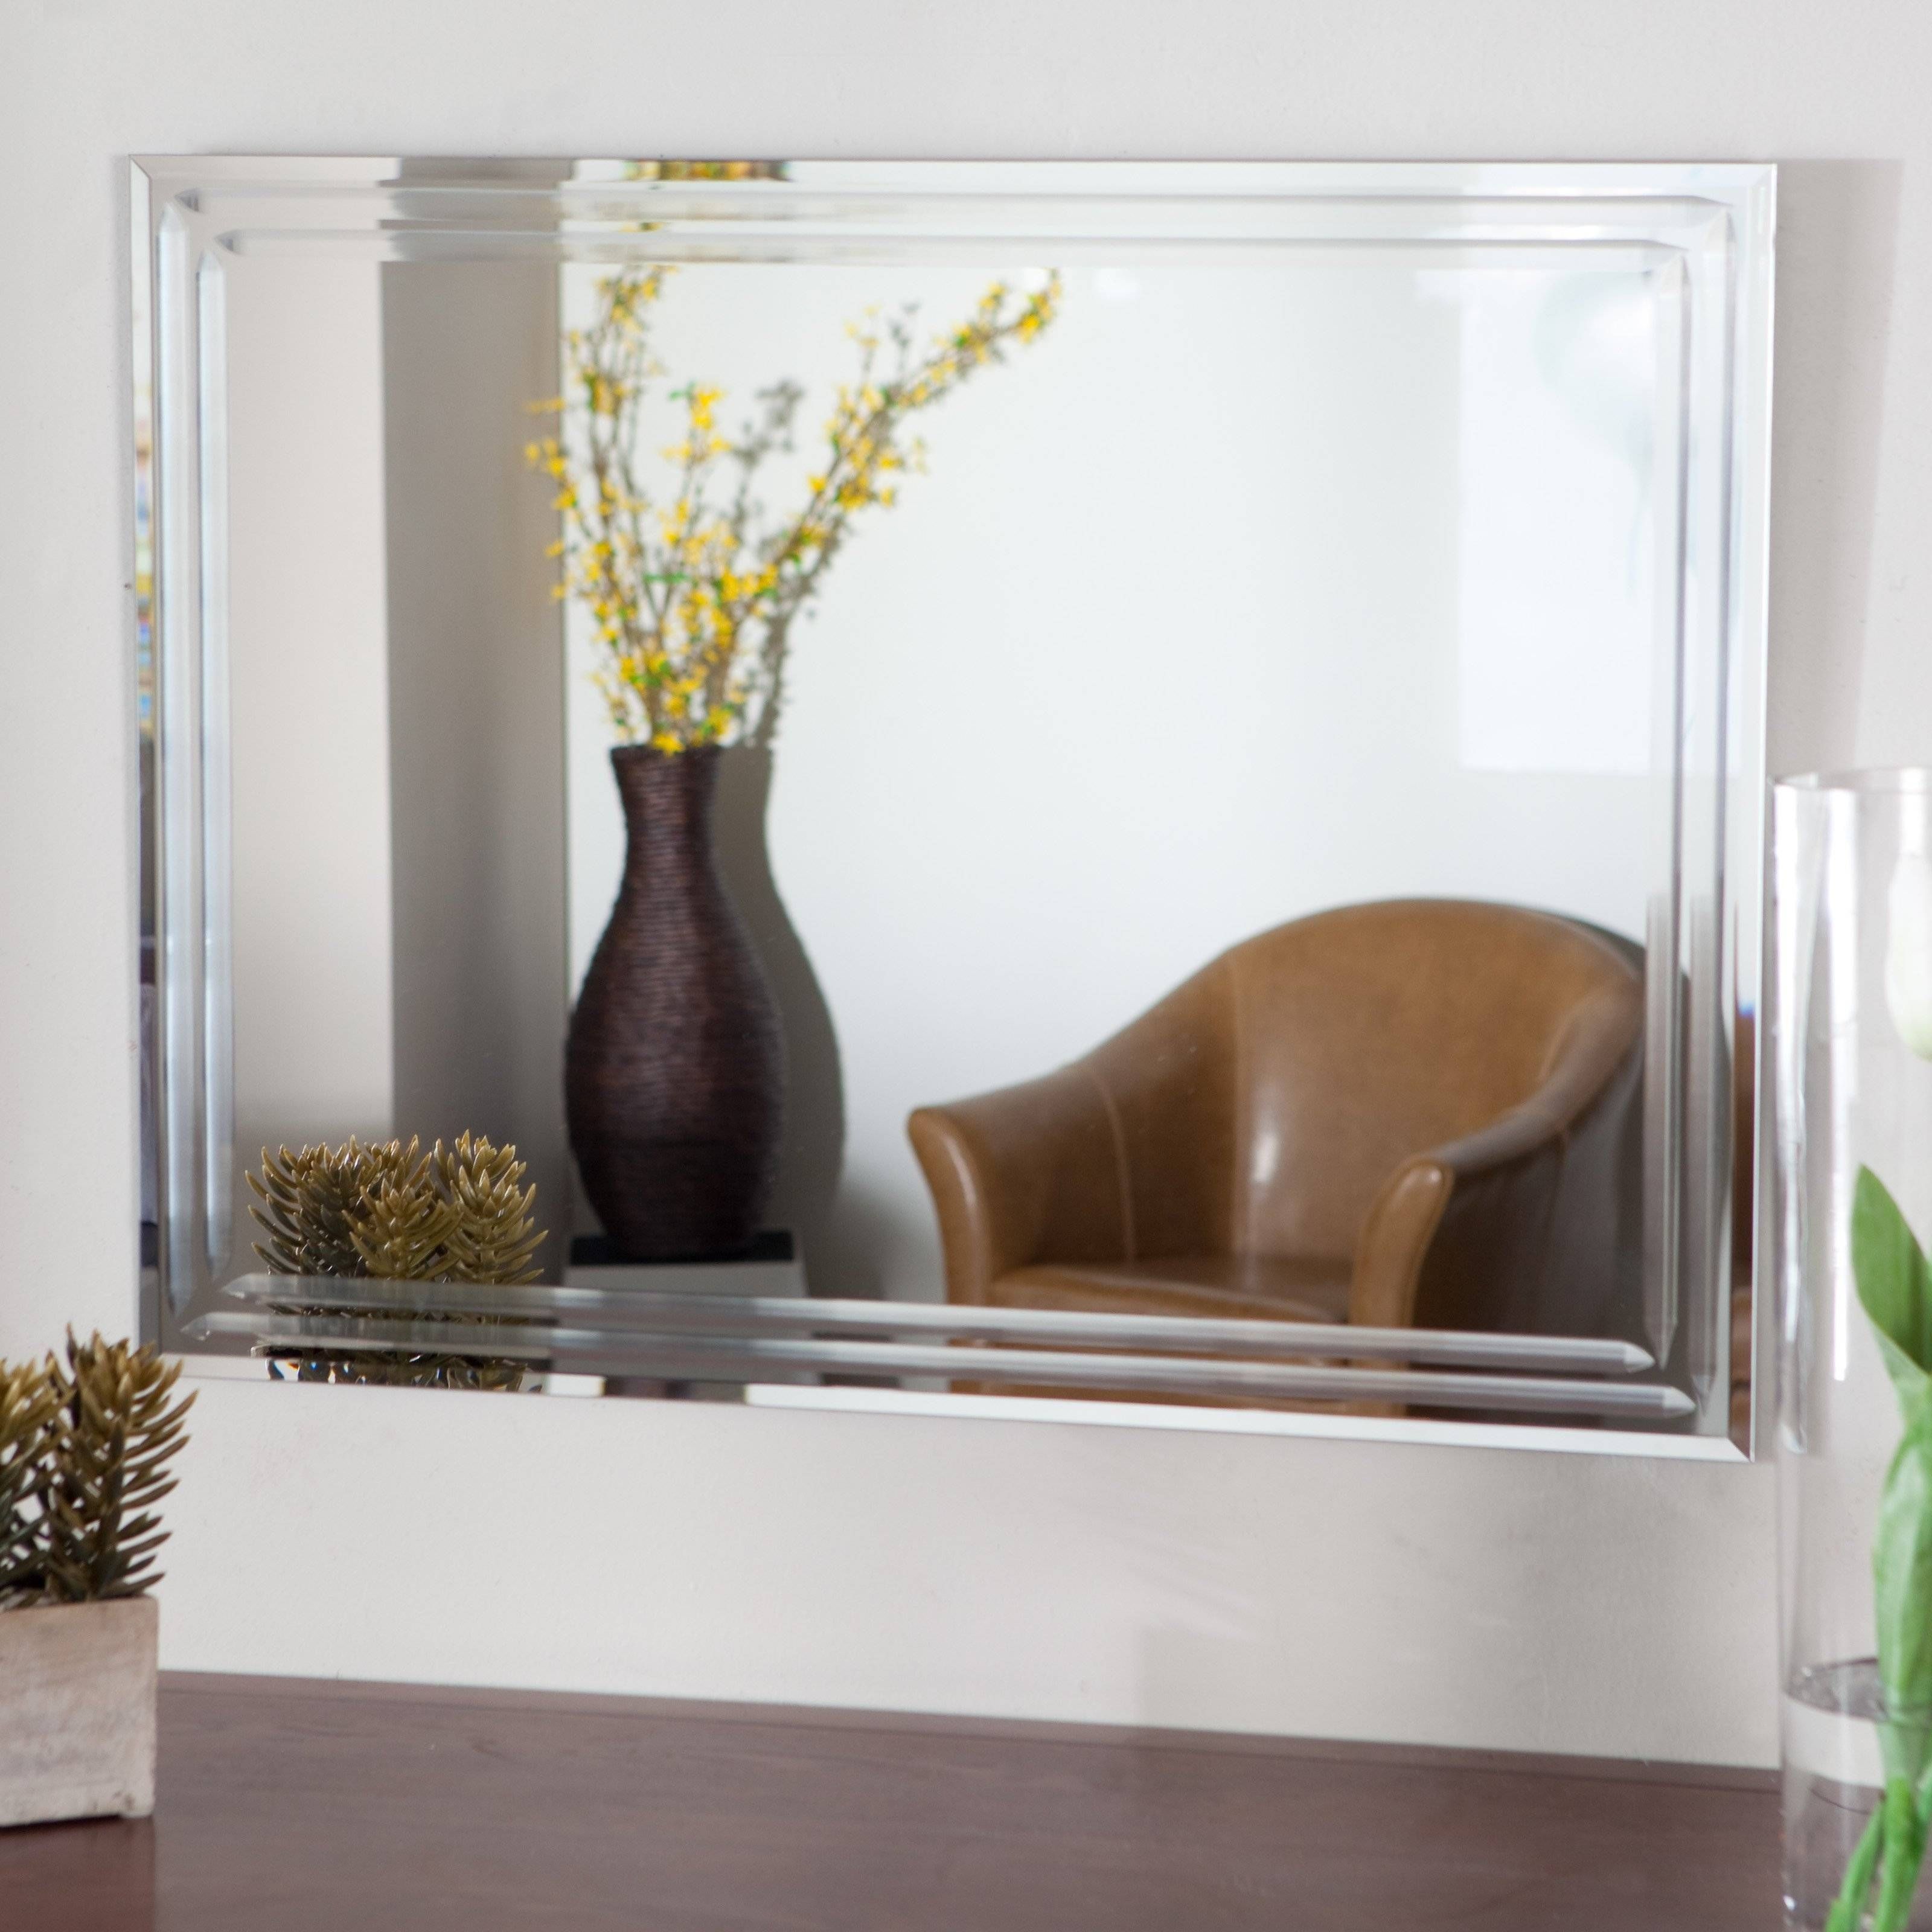 Bathroom: Light Up Your Home With Frameless Beveled Mirror In Full Length Frameless Wall Mirrors (View 23 of 25)